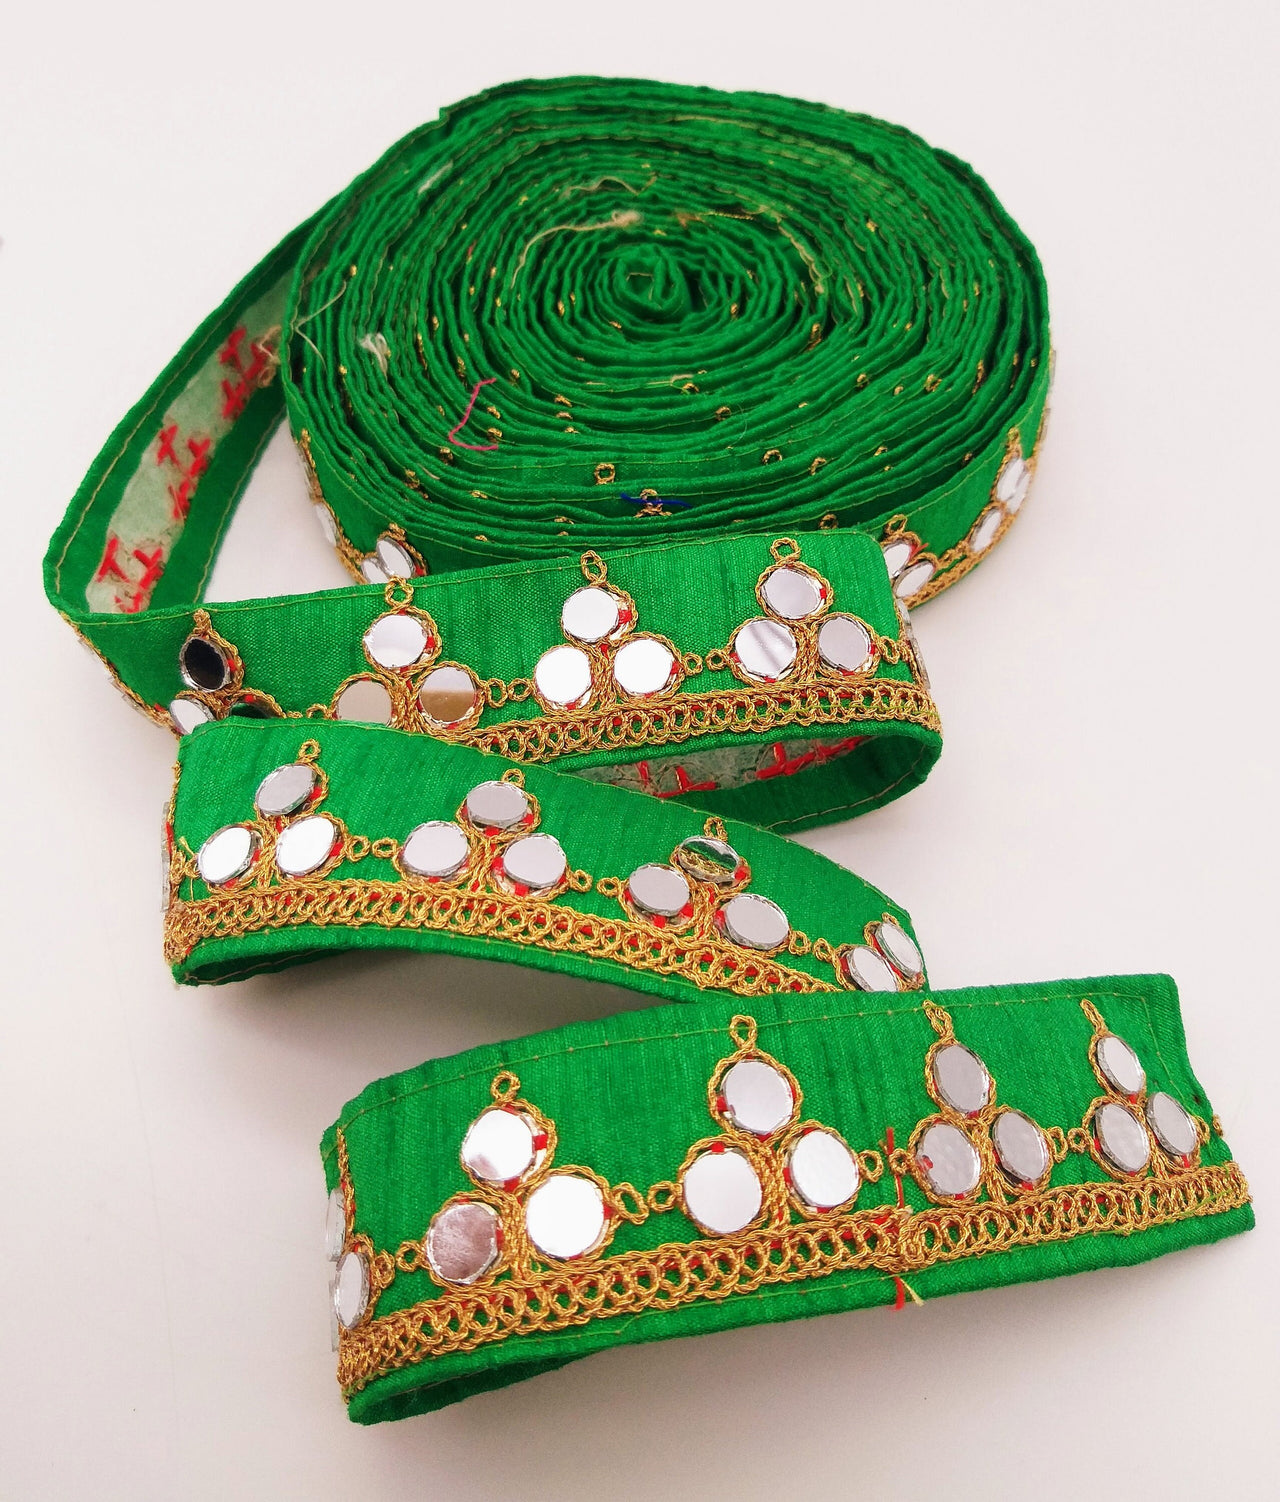 Green Silk Trim With Mirrors Embellishments and Gold Embroidery, Approx. 34mm Wide, Decorative Trim Costume Trim Fashion Trim By Yard